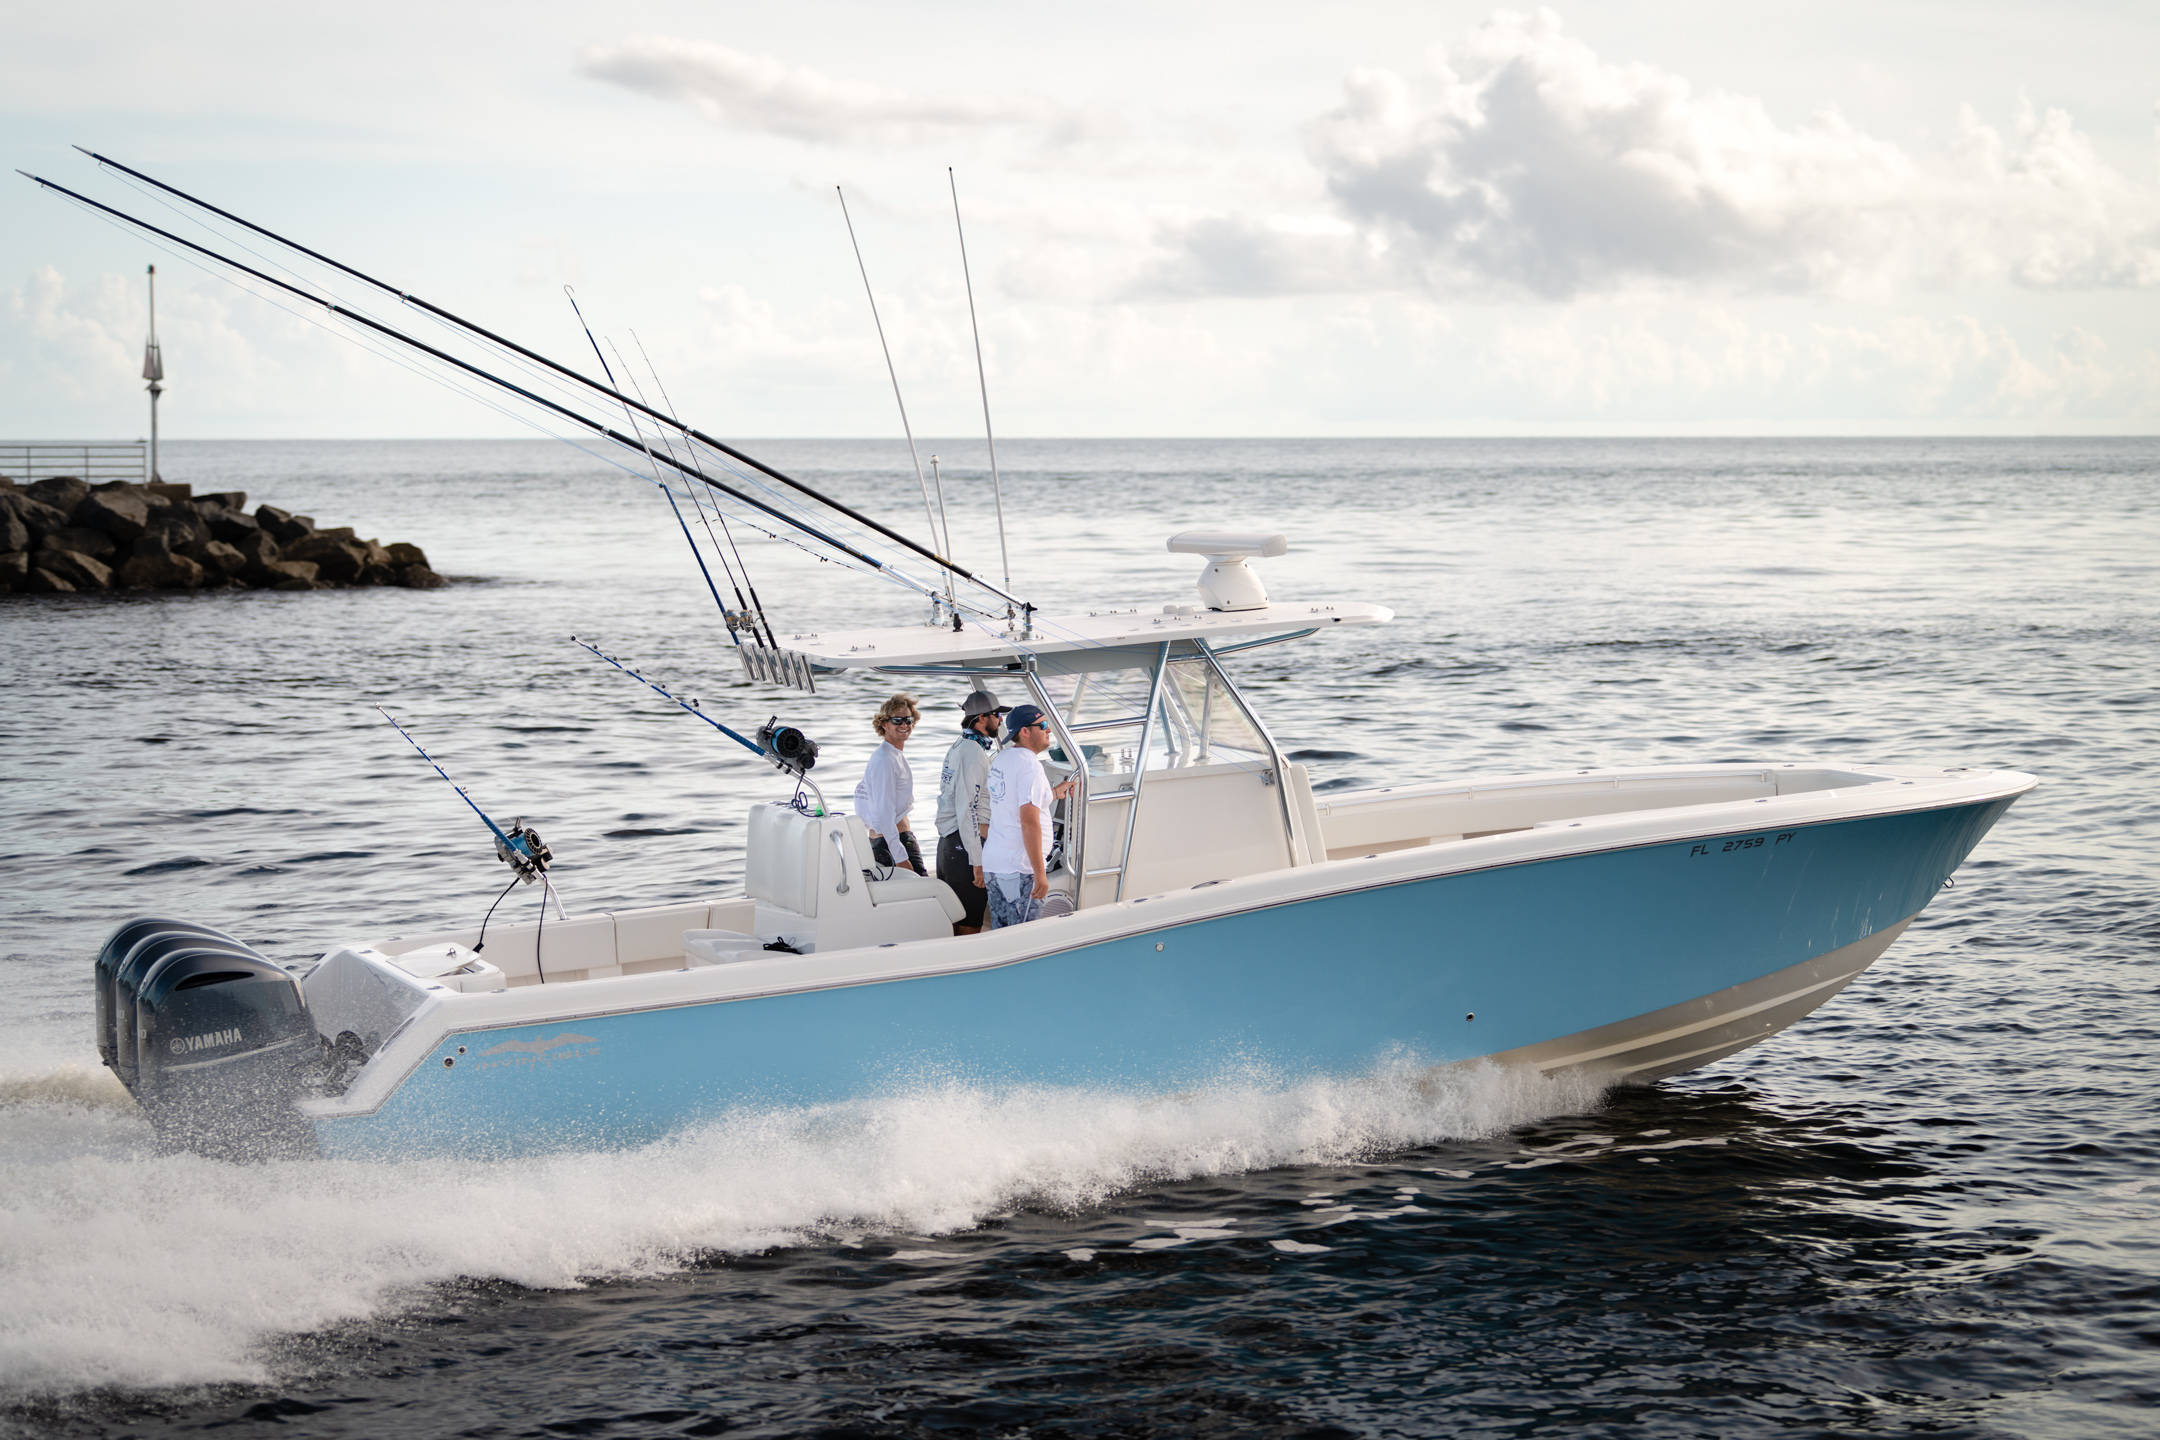 Contact us today to be put in touch with a DH Yacht Sales representative to learn more about our approach to buying and selling custom sportfish boats and yachts.